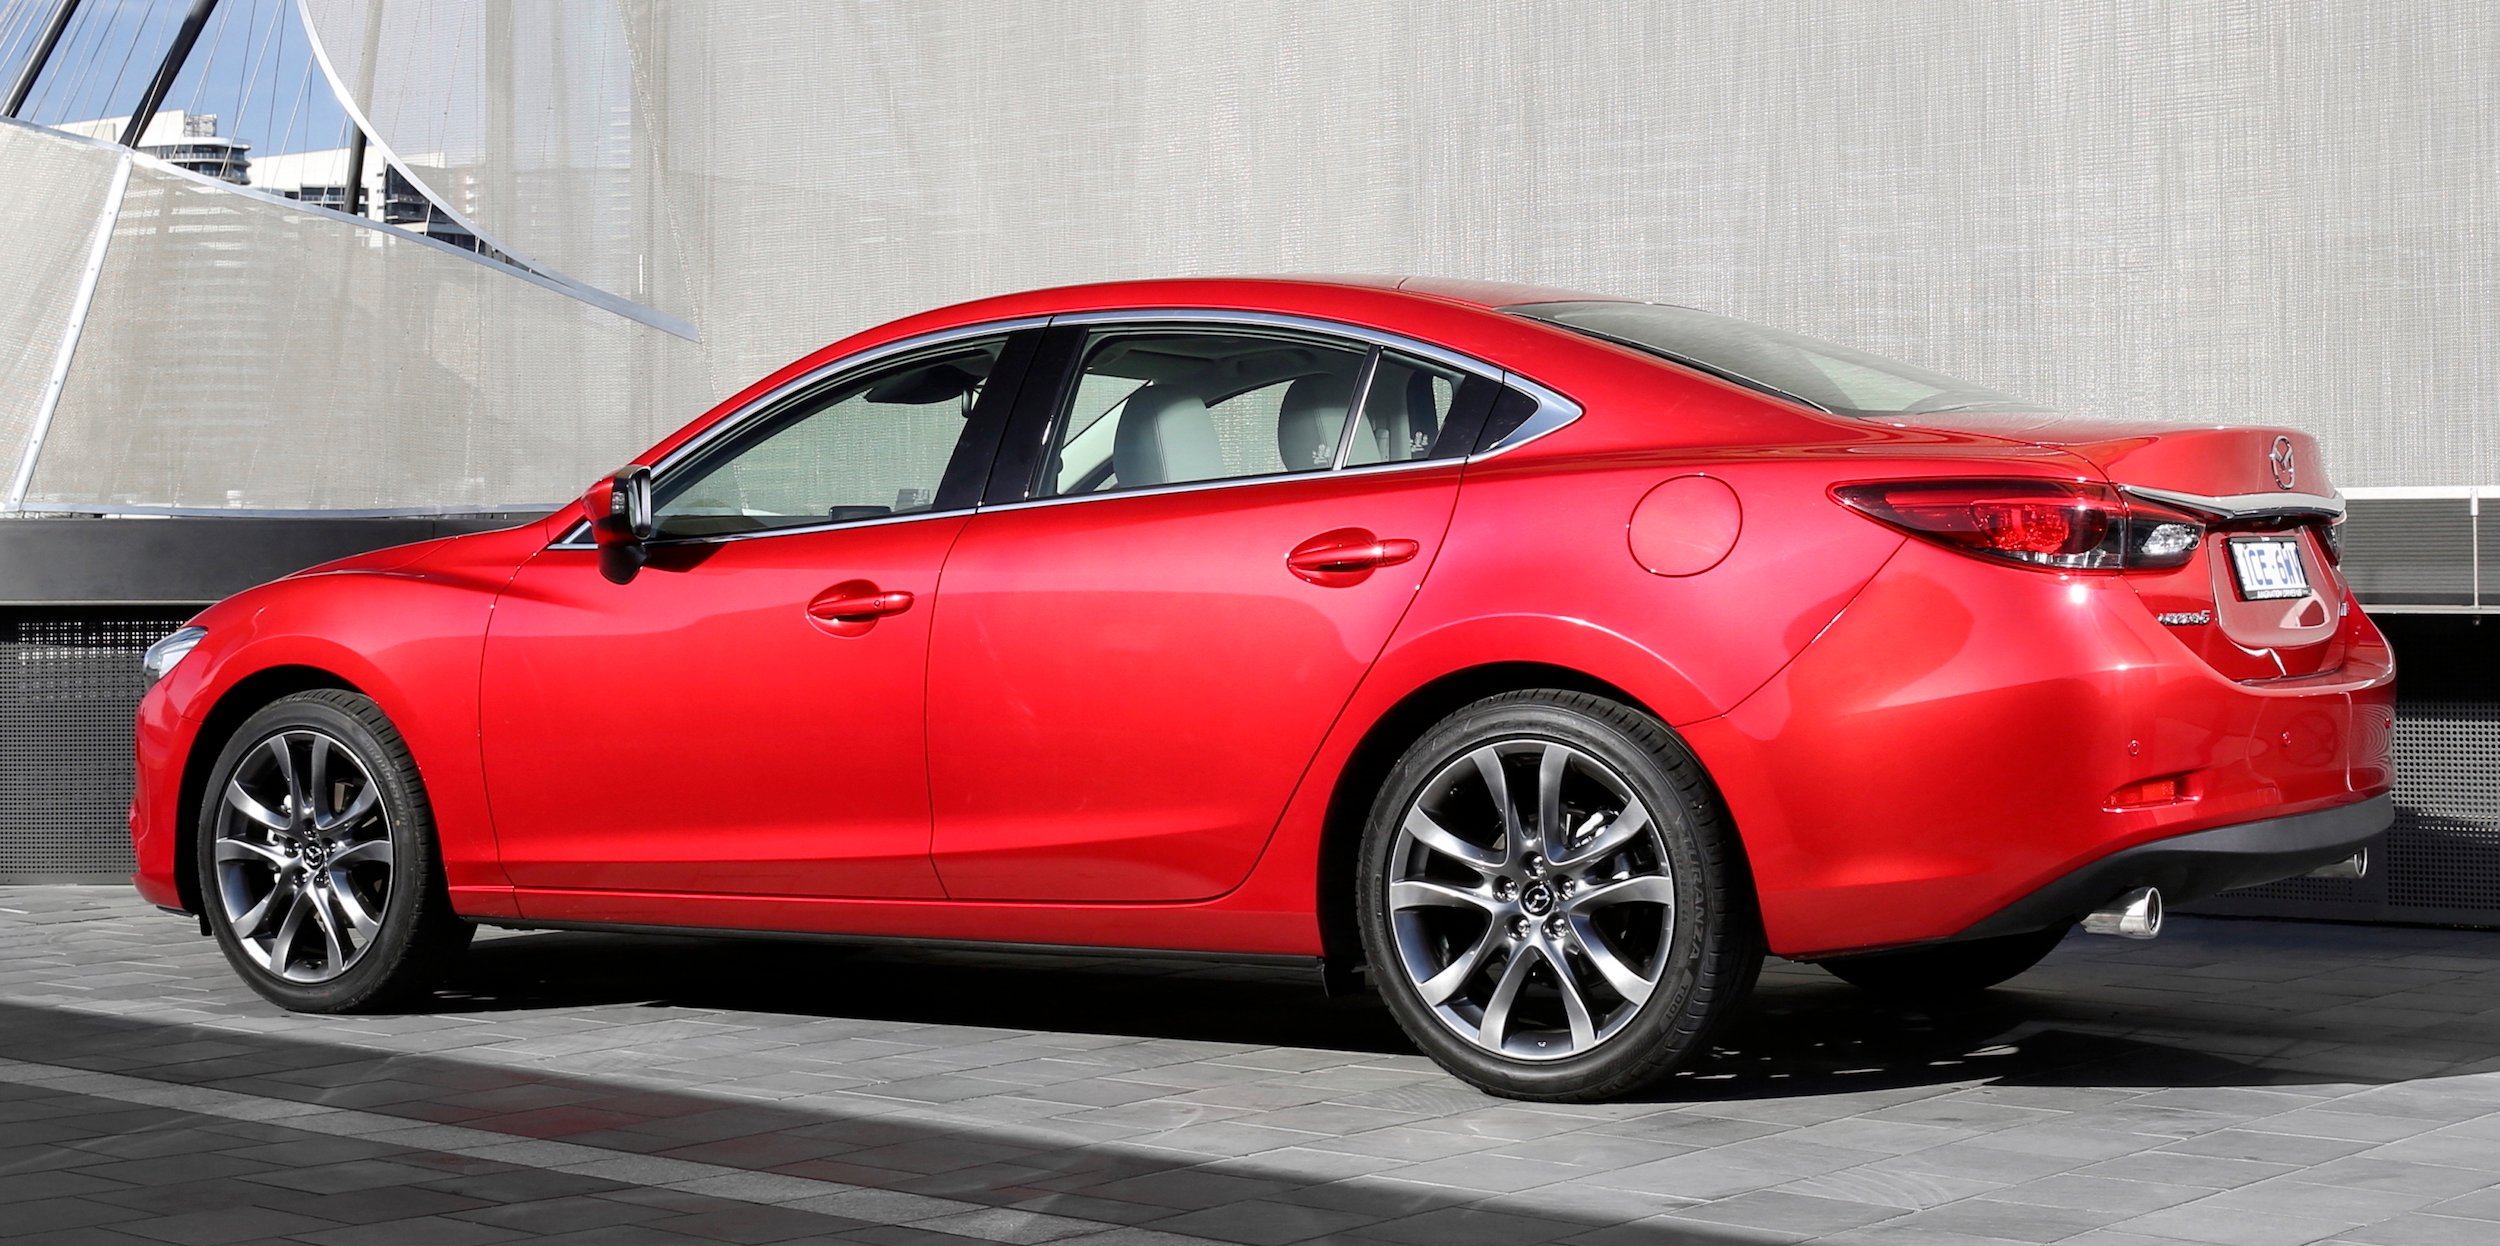 2015 Mazda 6 pricing and specifications Photos (1 of 7)